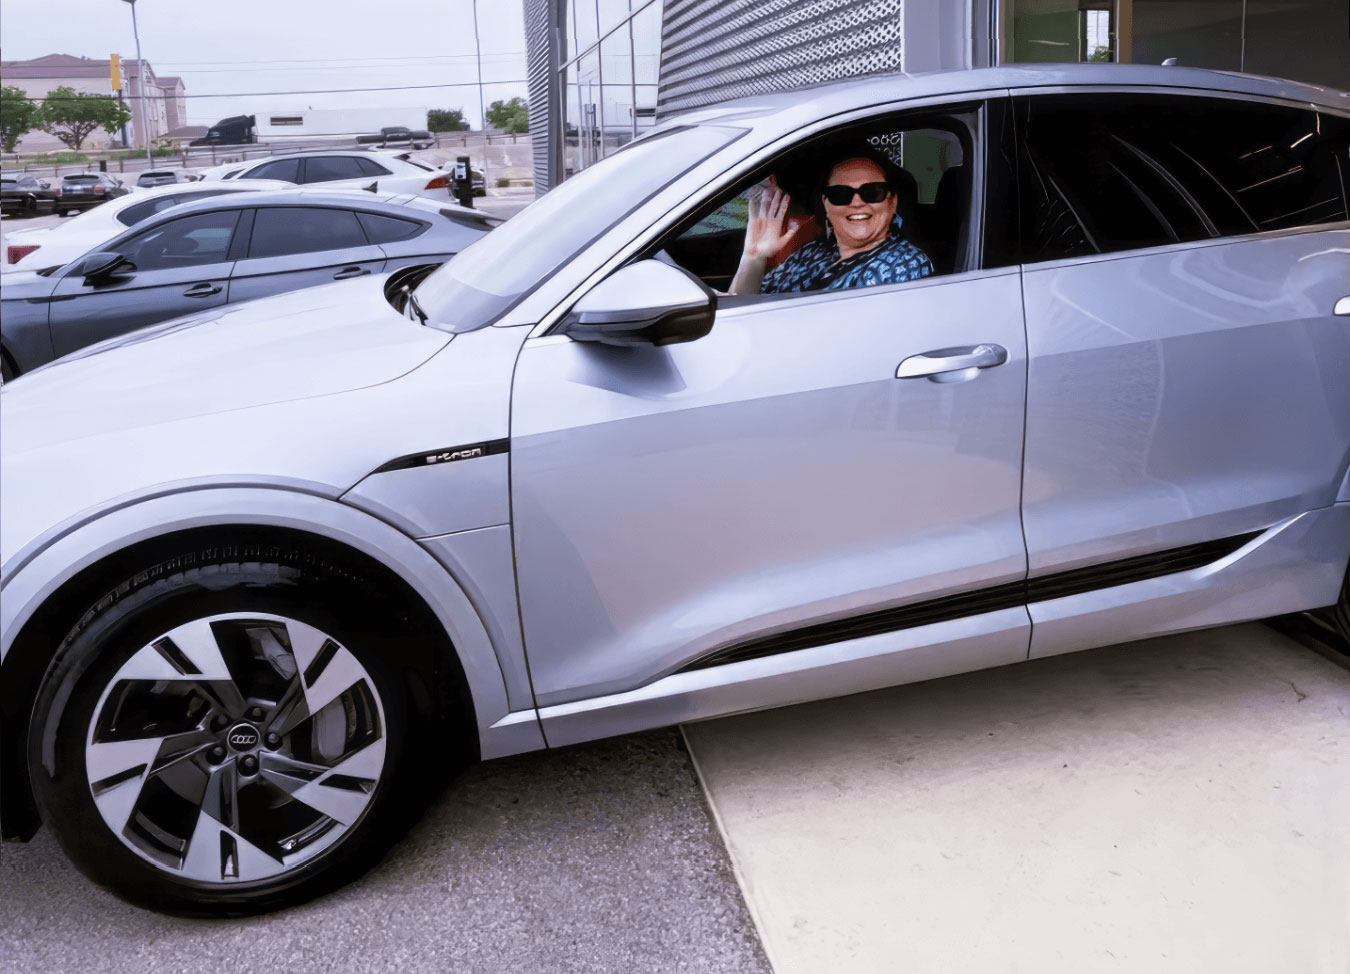 Bethany Allee drives out of dealership with new EV